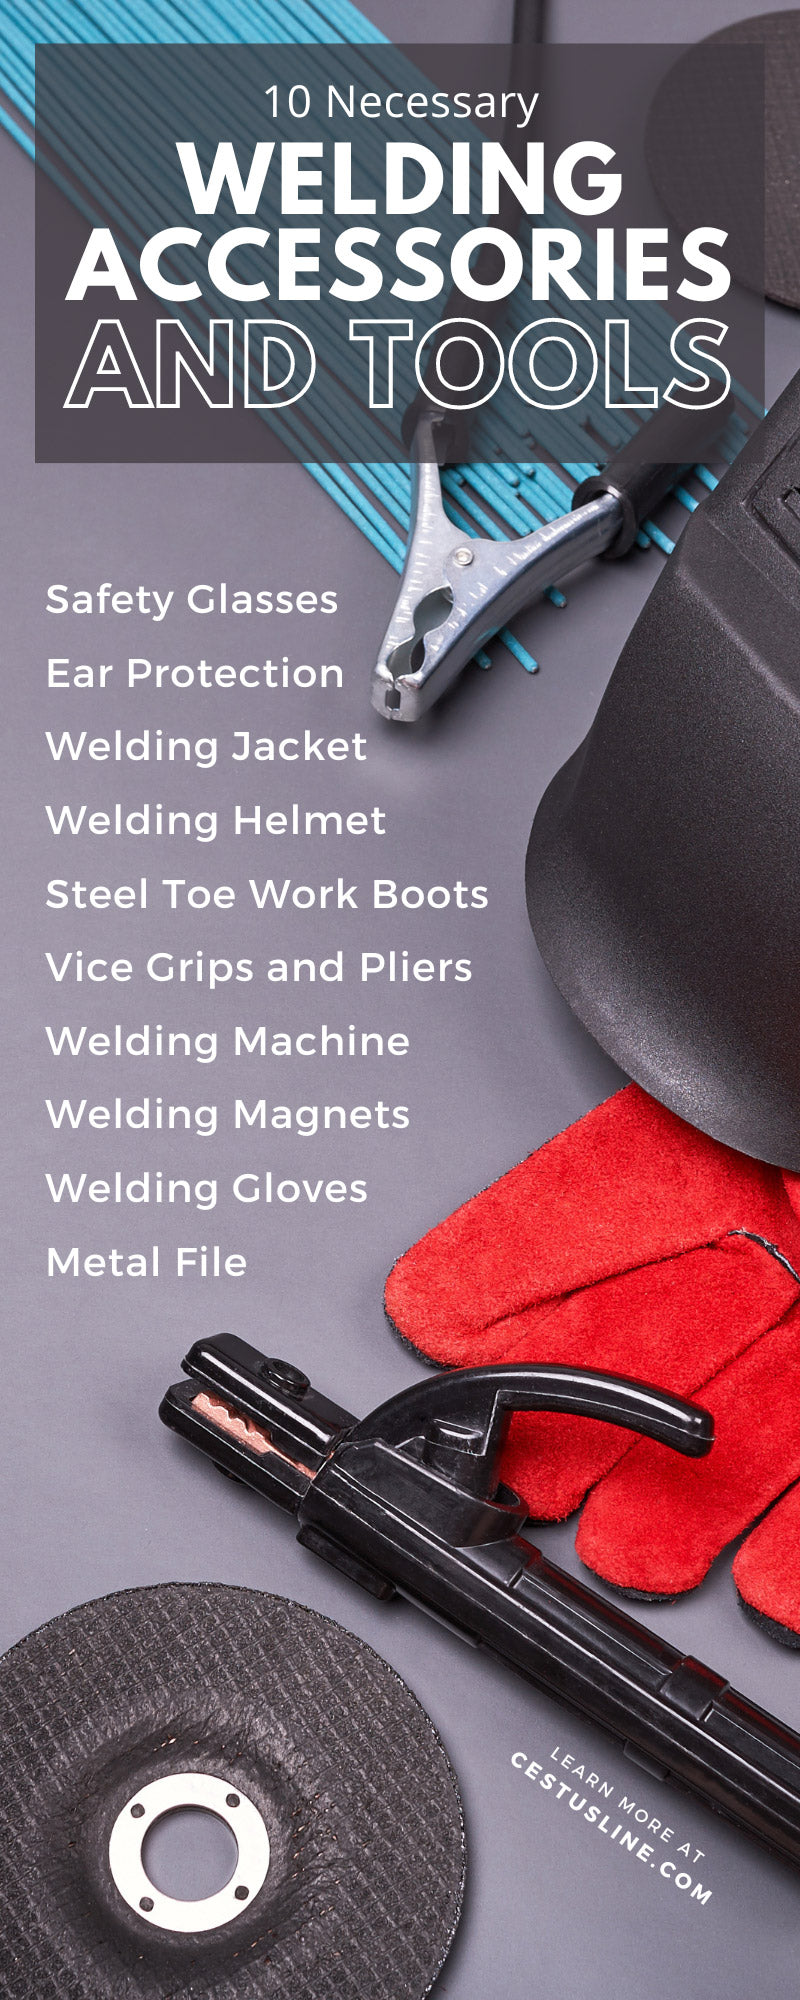 27 Welding Tools and Accessories That Welders Can't Work Without